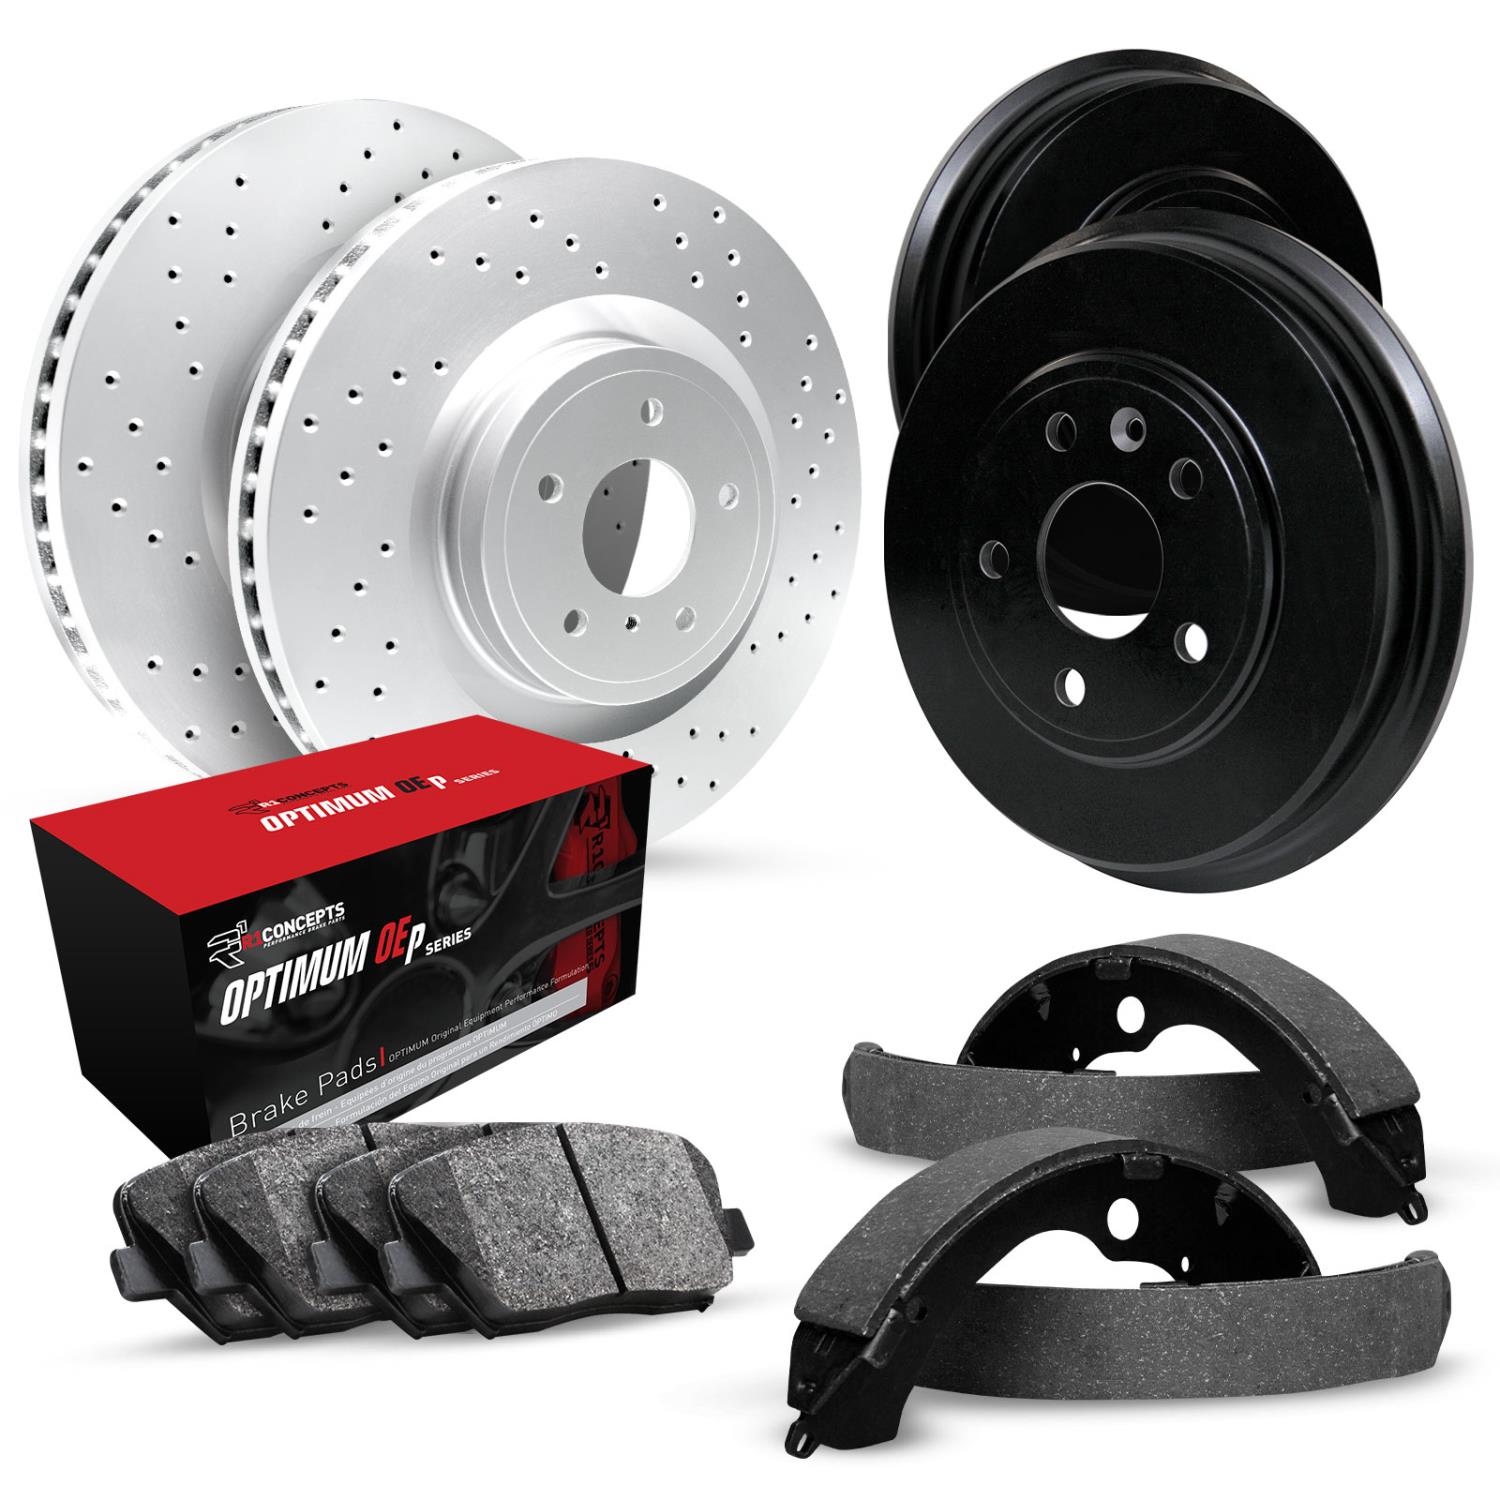 GEO-Carbon Drilled Brake Rotor & Drum Set w/Optimum OE Pads & Shoes, 1991-1993 GM, Position: Front & Rear